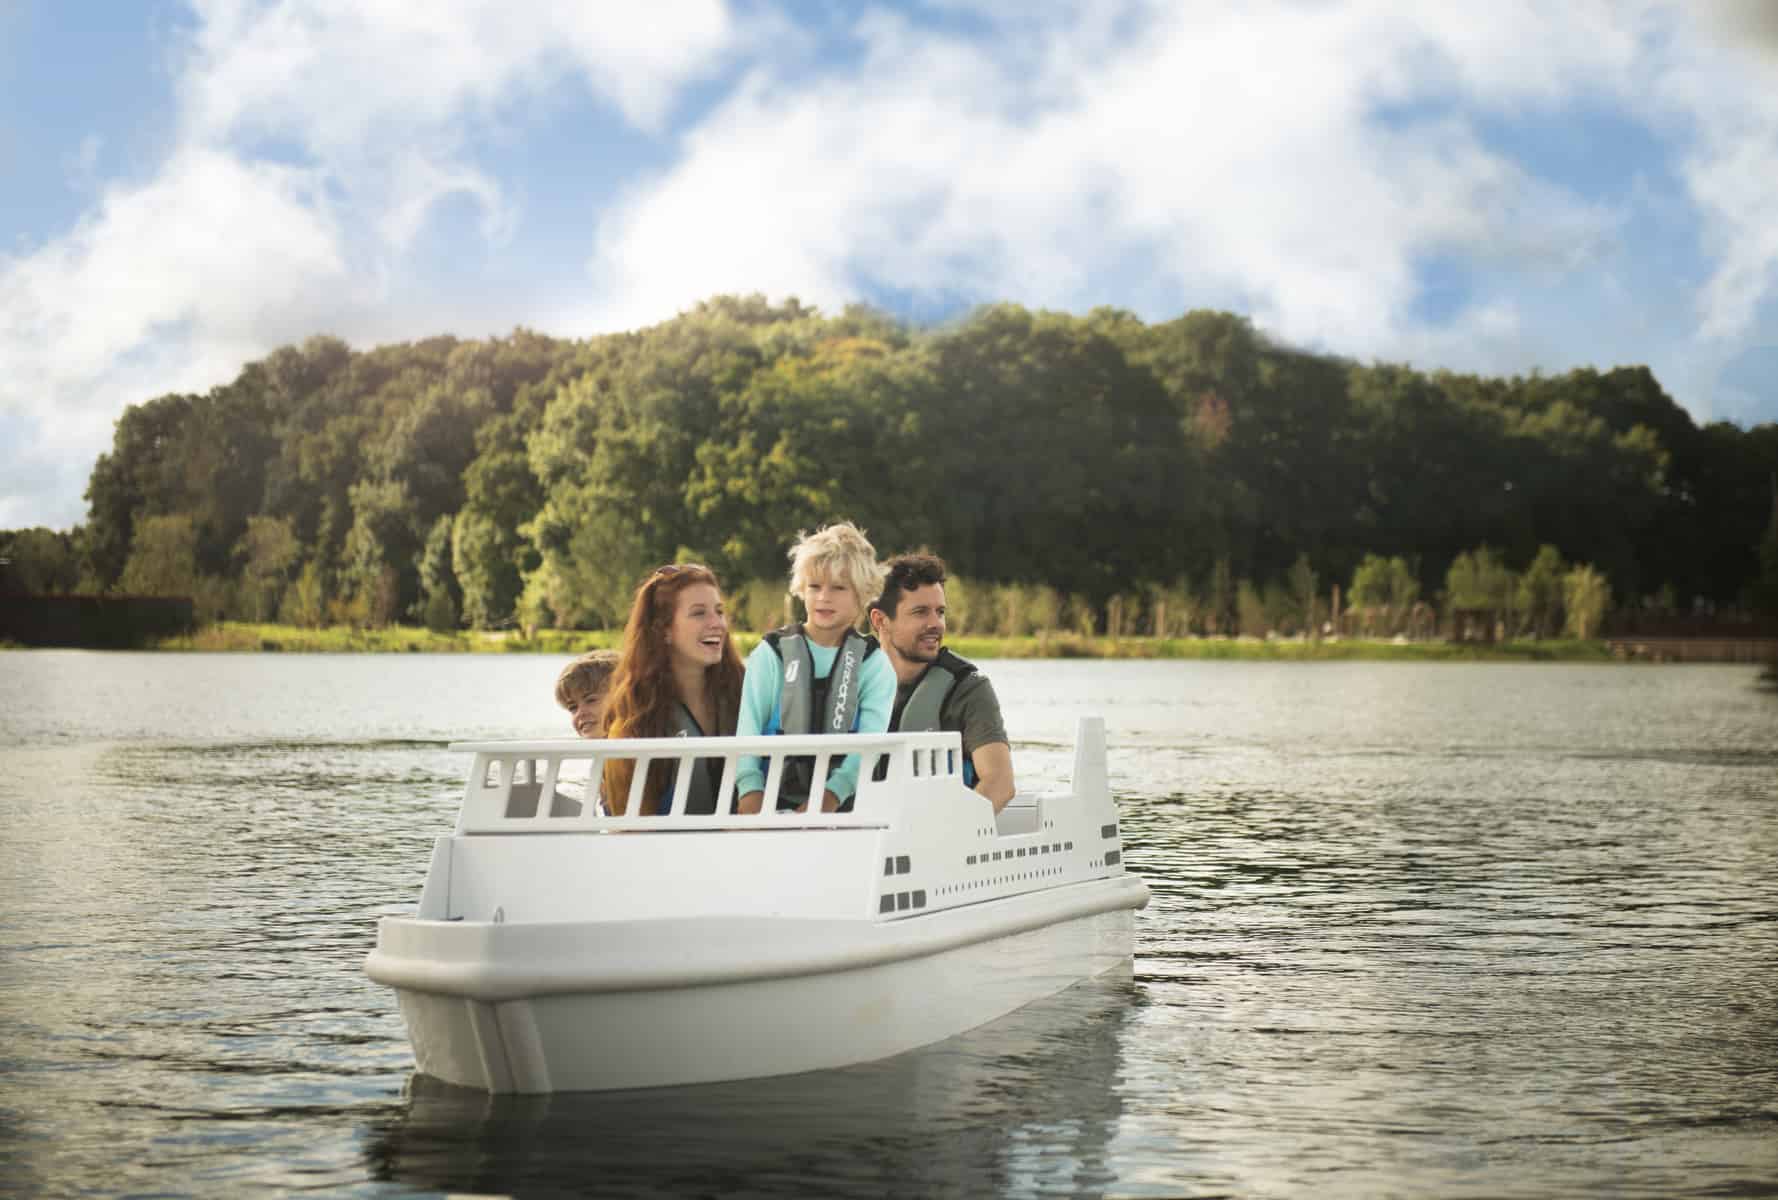 People riding in a small white boat on a lake with trees in the background